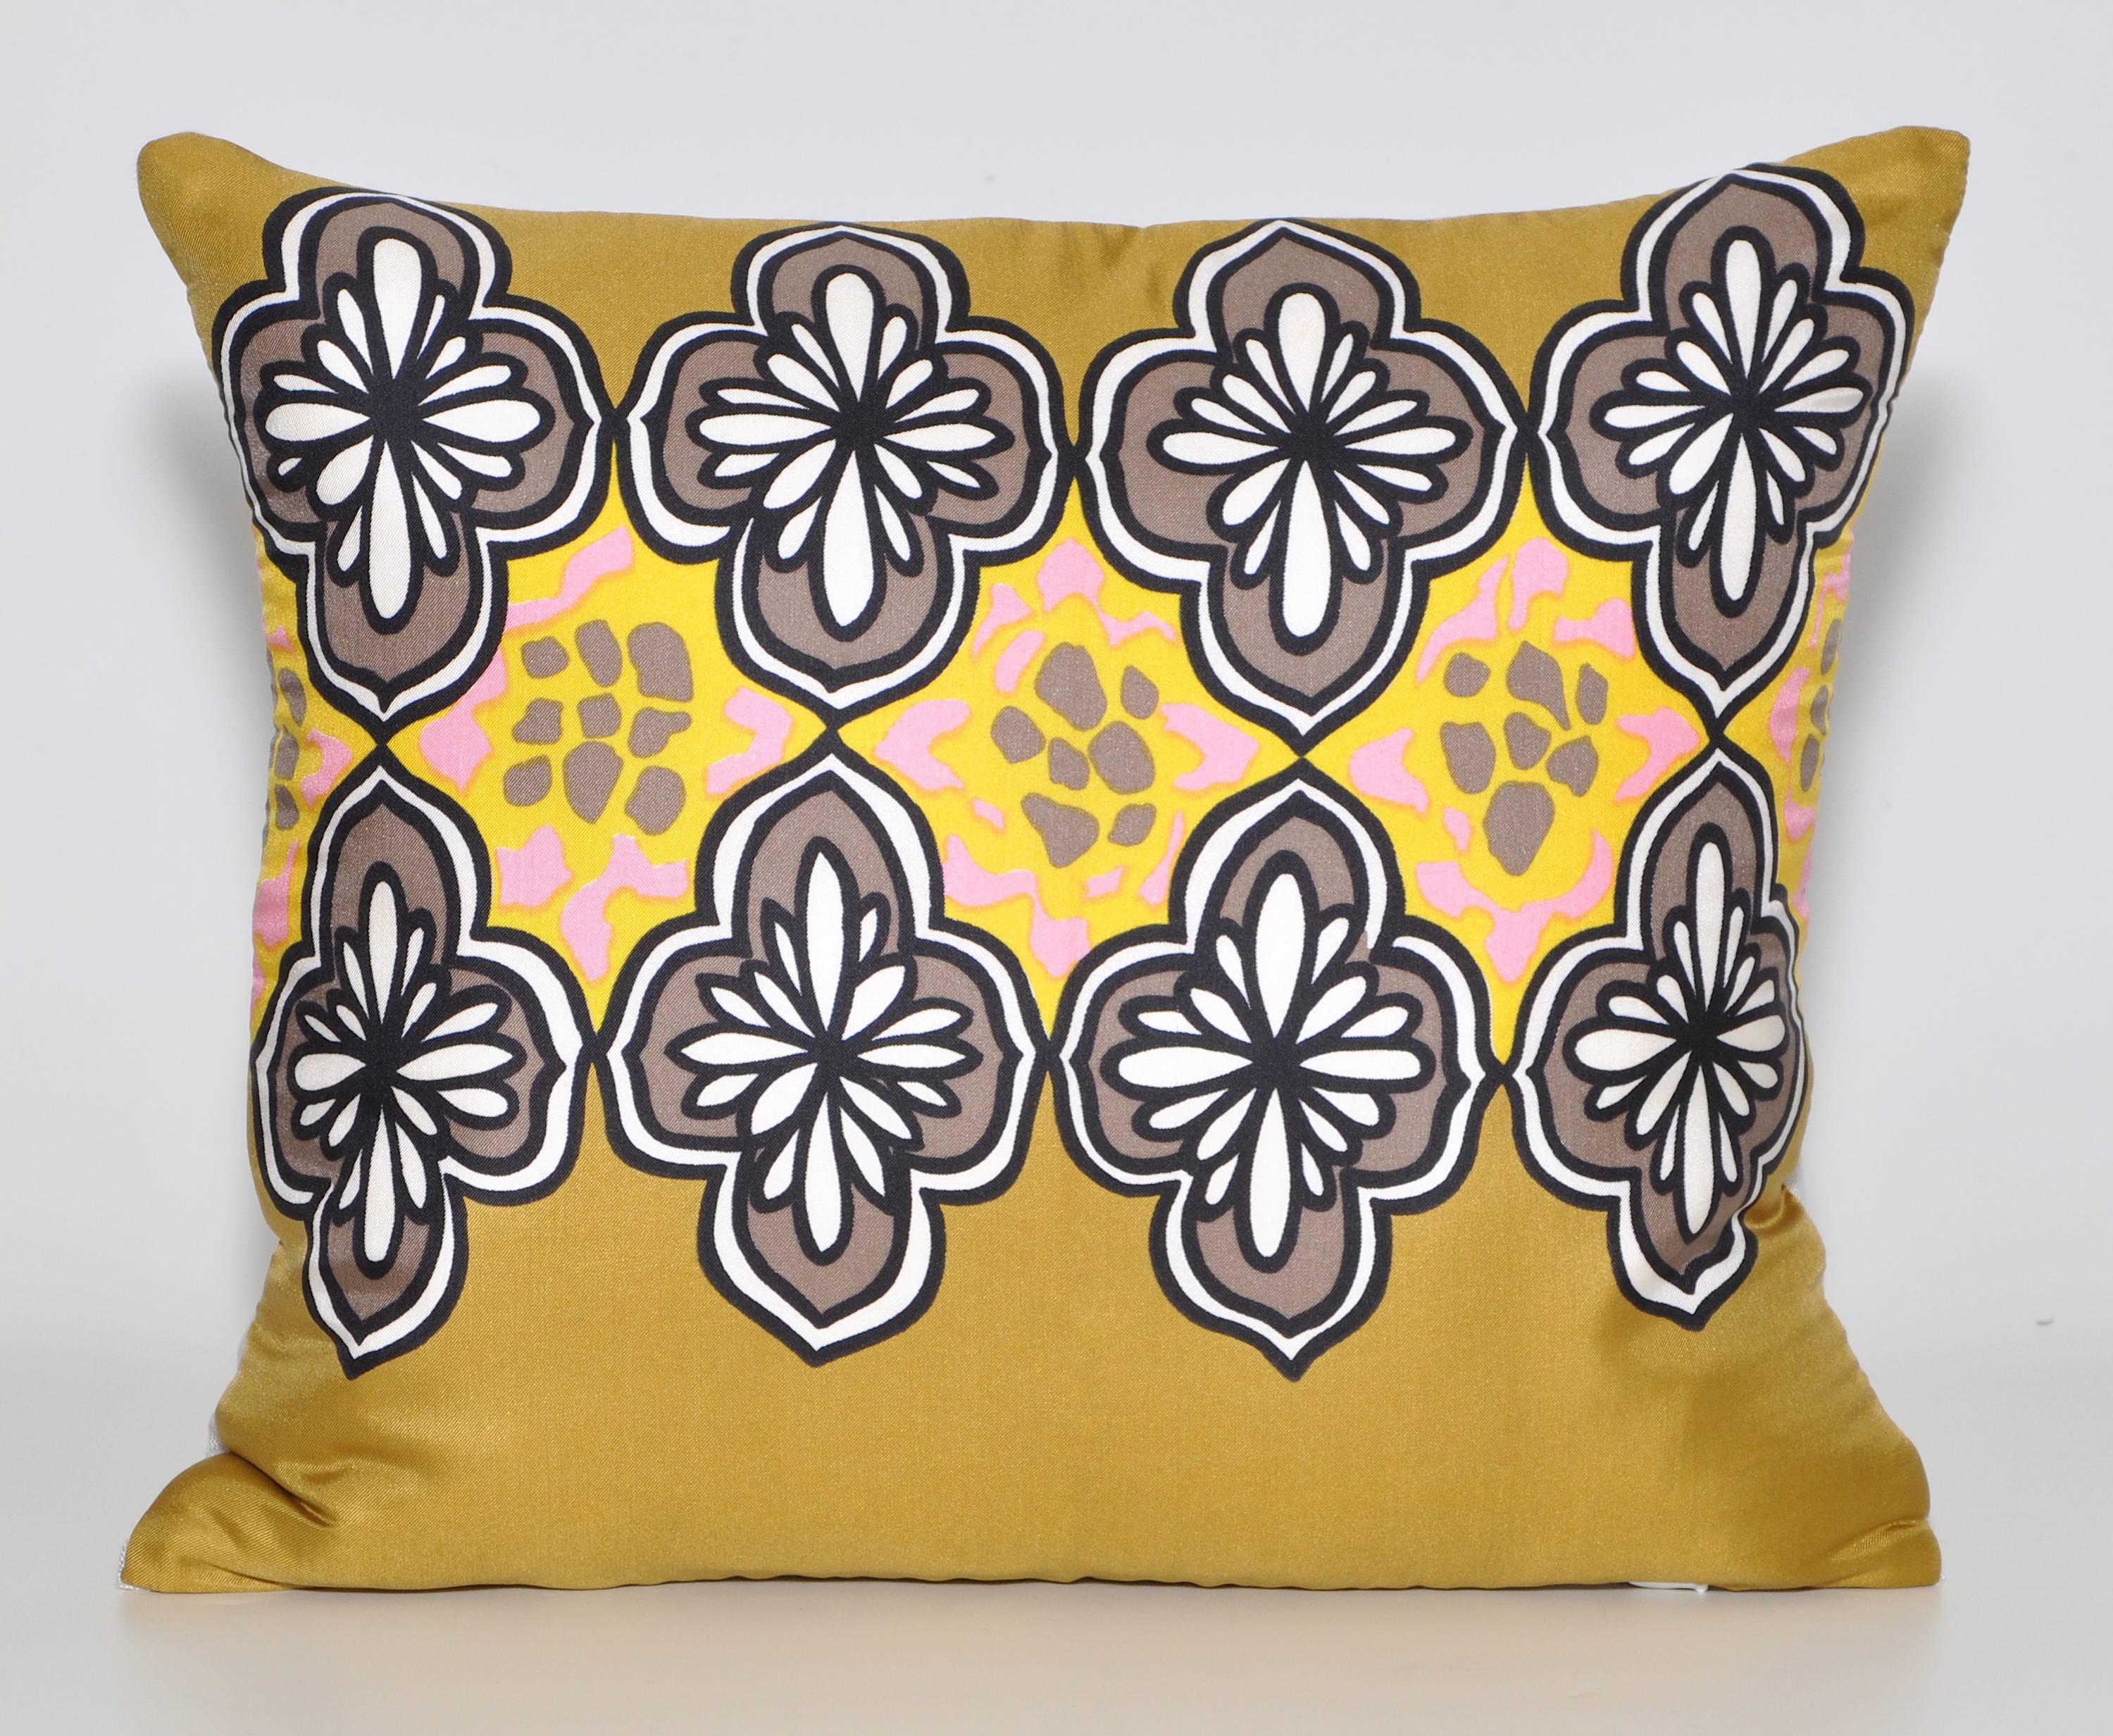 A luxury set of custom-made one-of-a-kind cushions (pillows) created from an exquisite vintage silk Pierre Balmain fashion scarf in a beautifully elaborate design. Magnificently decorated in architectural quatrefoil motifs, a symbol often found in